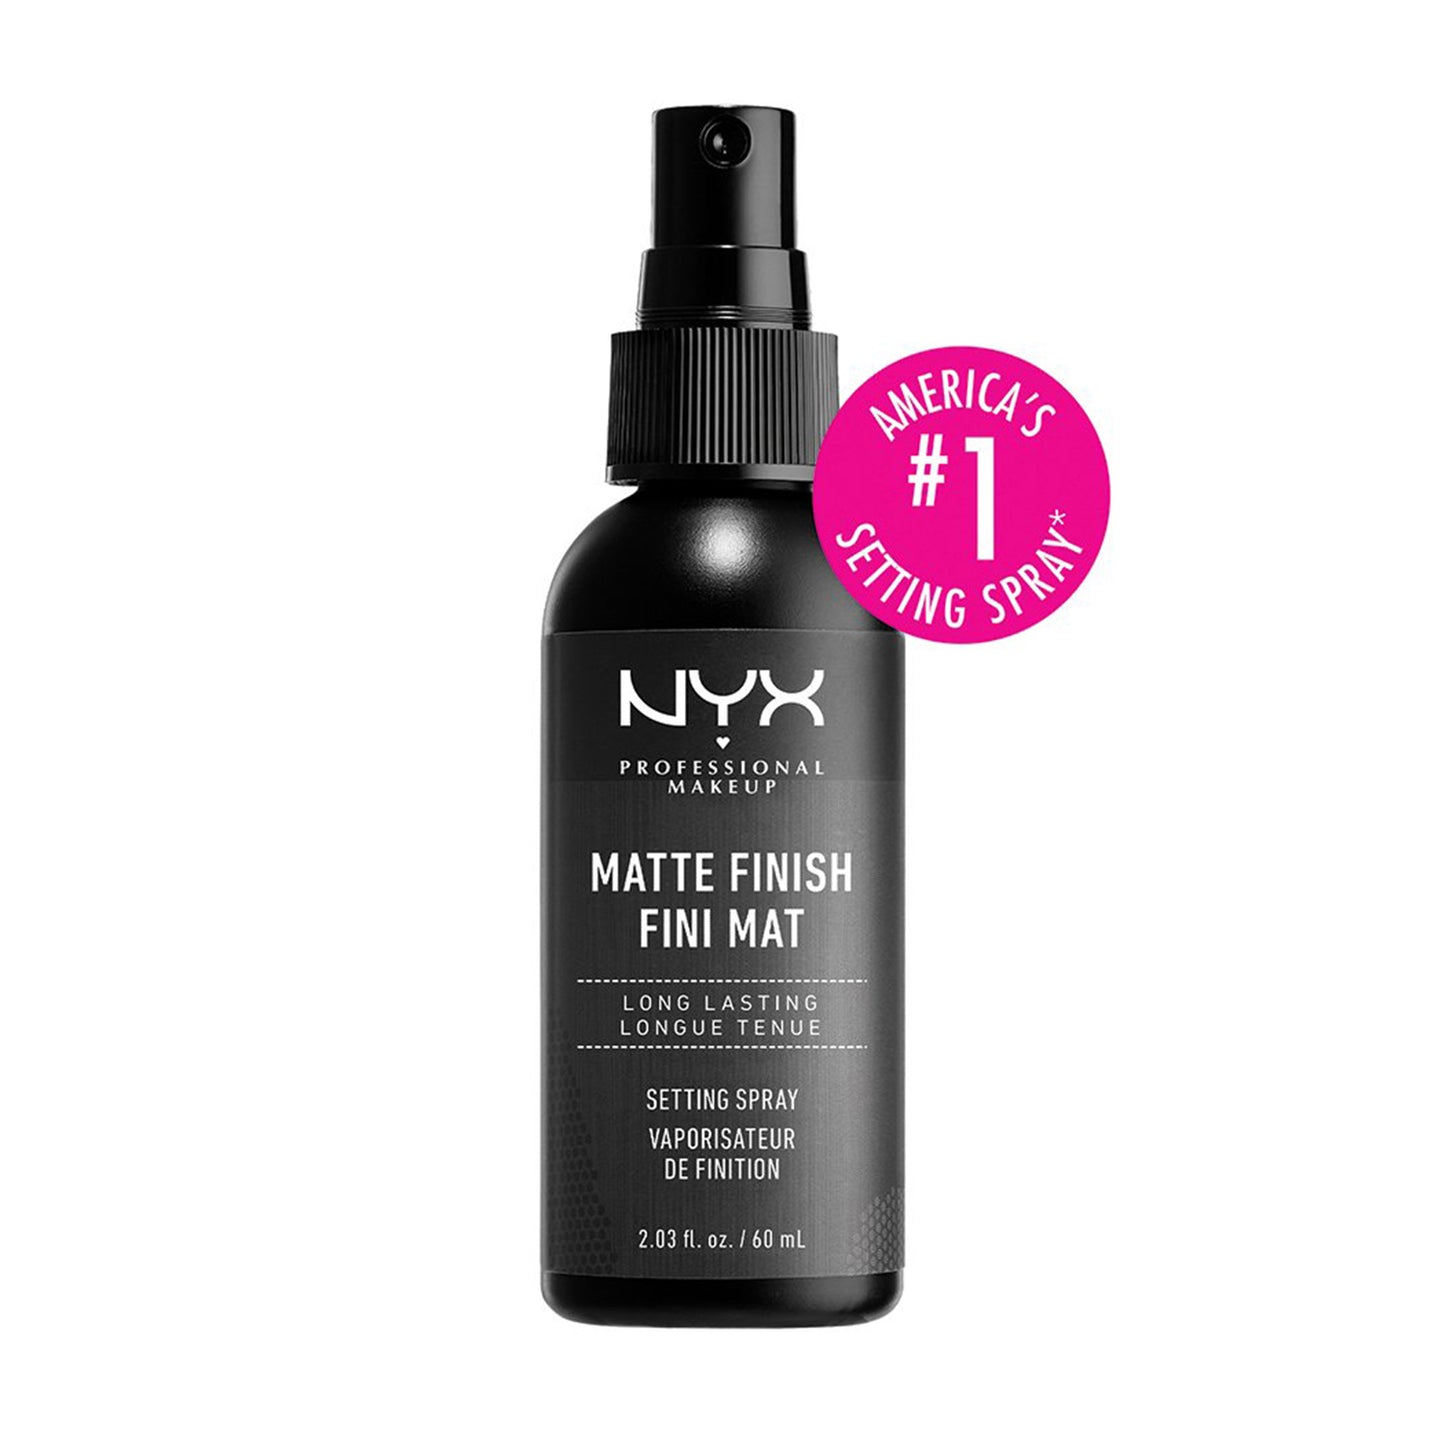 NYX Setting Spray - Matte Finish available at Heygirl.pk for delivery in Karachi, Lahore, Islamabad across Pakistan.